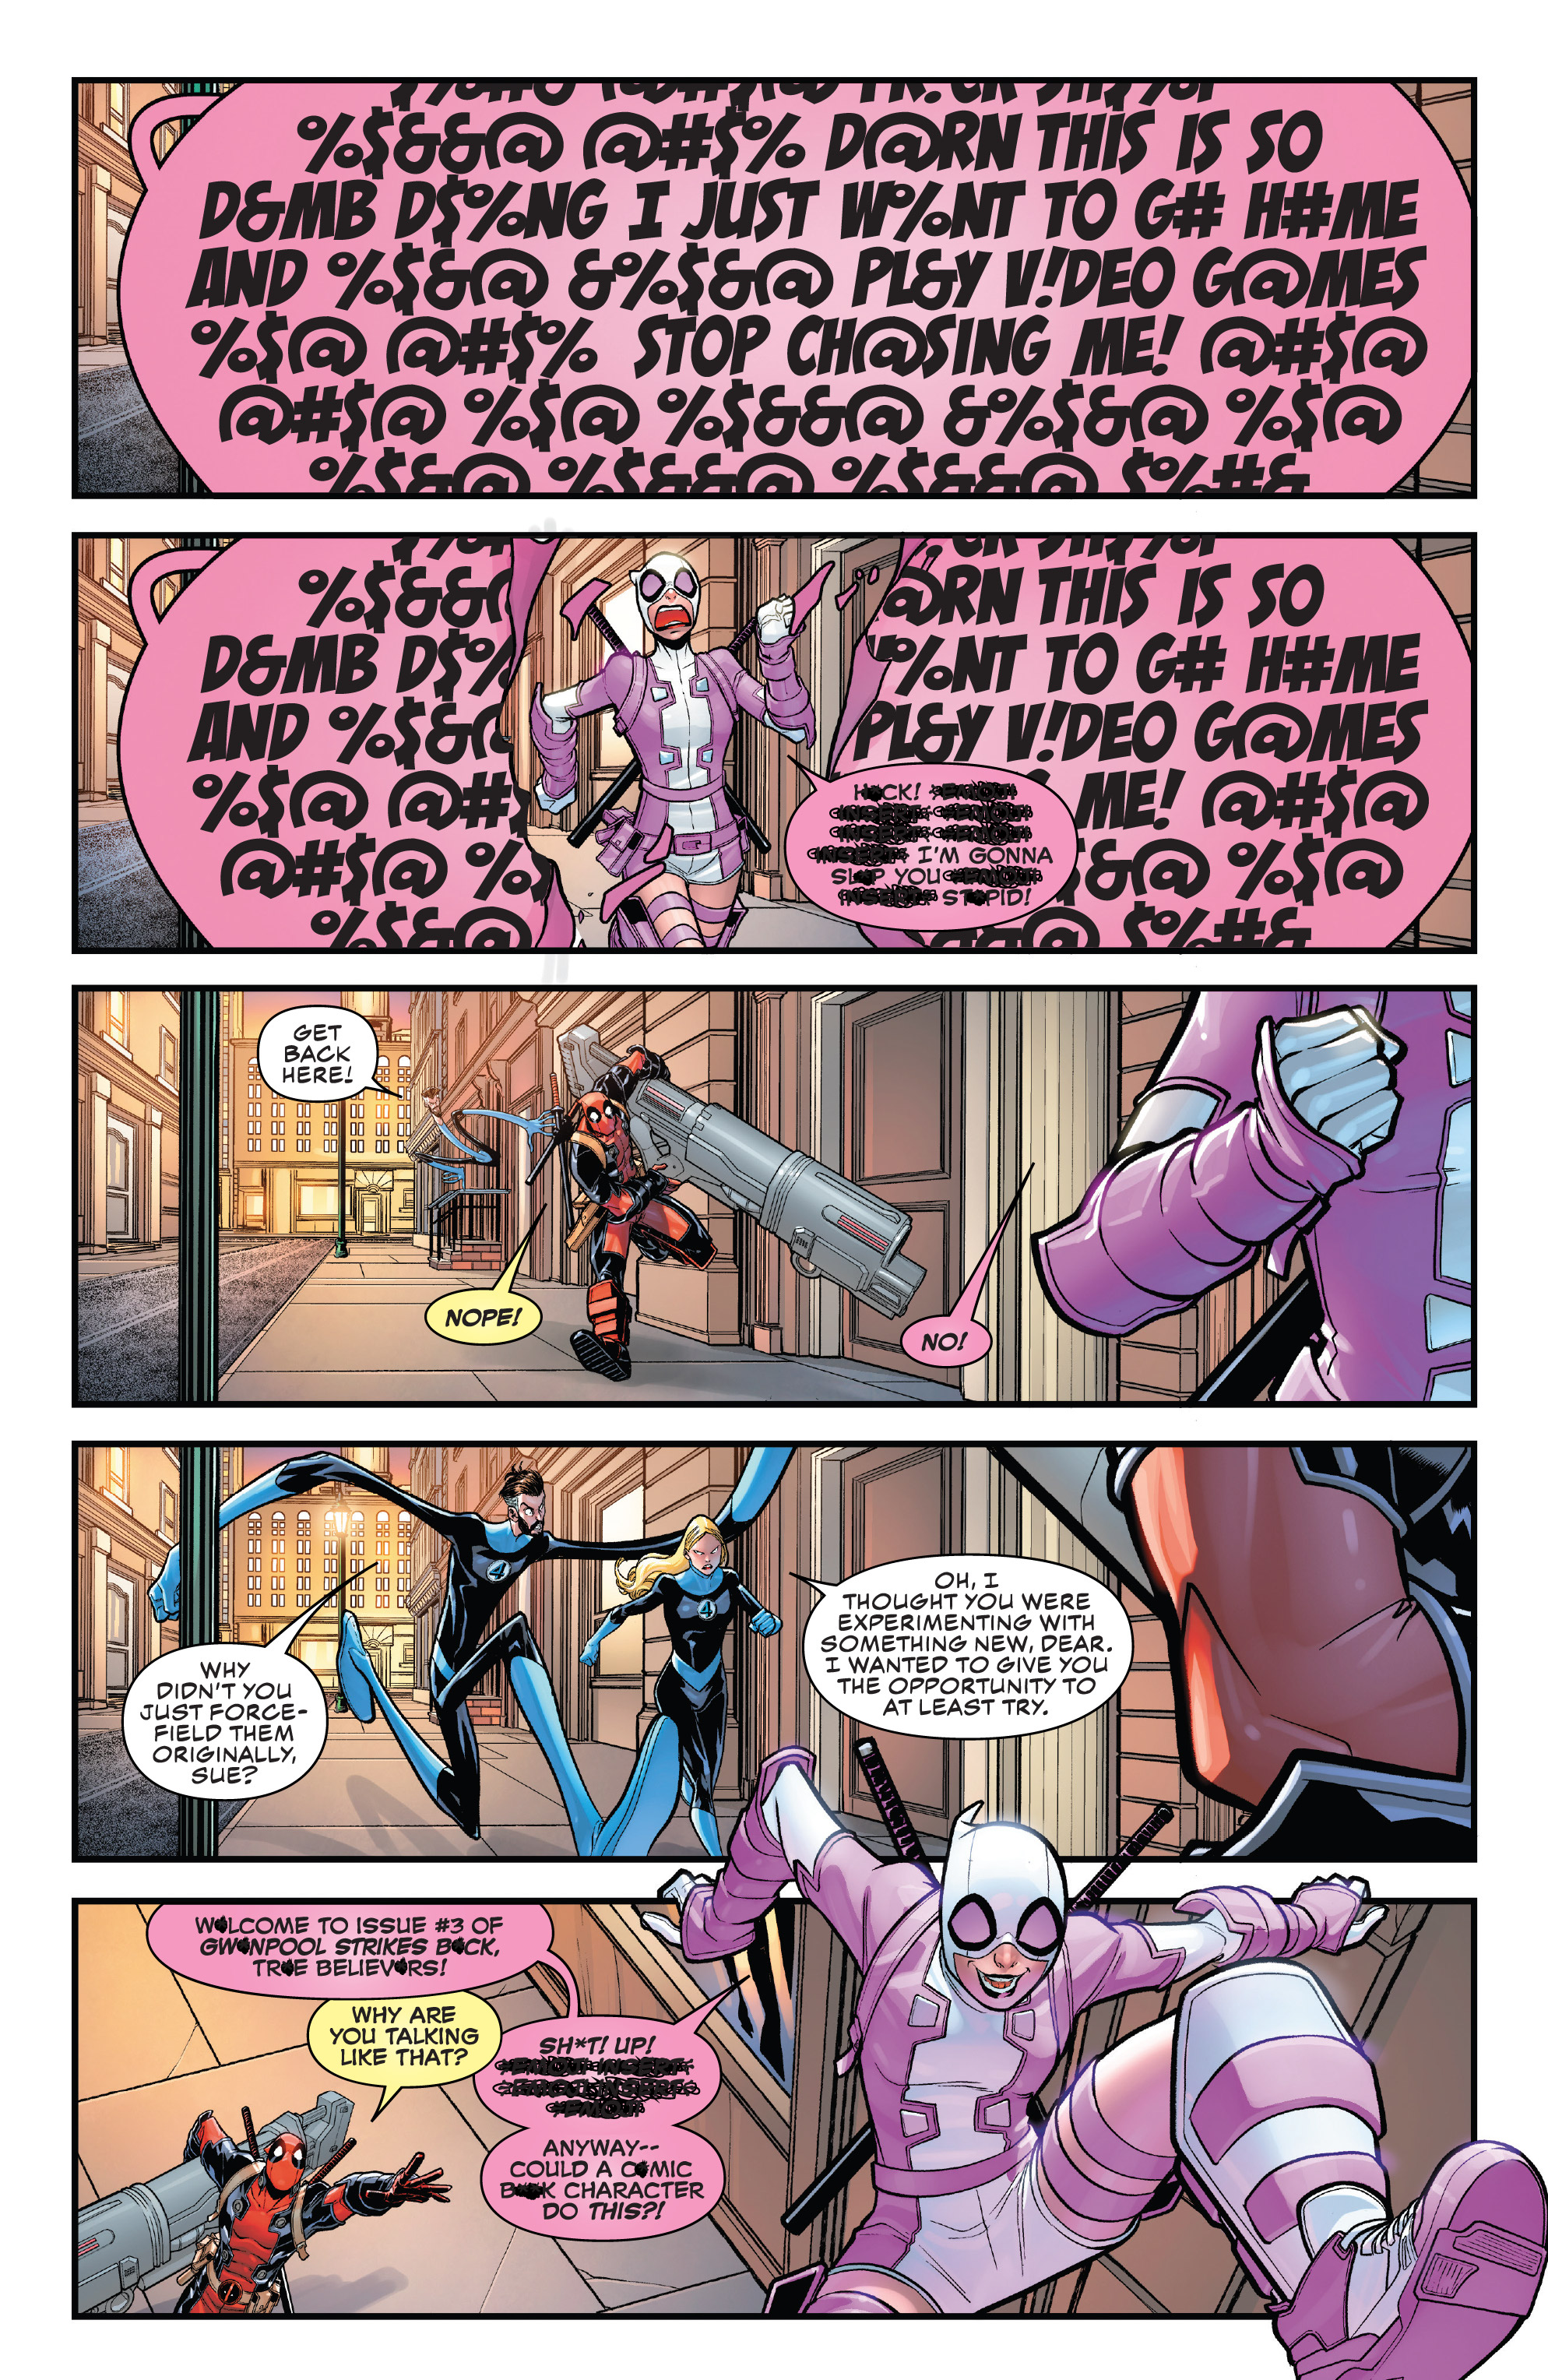 Gwenpool Strikes Back (2019-): Chapter 3 - Page 3